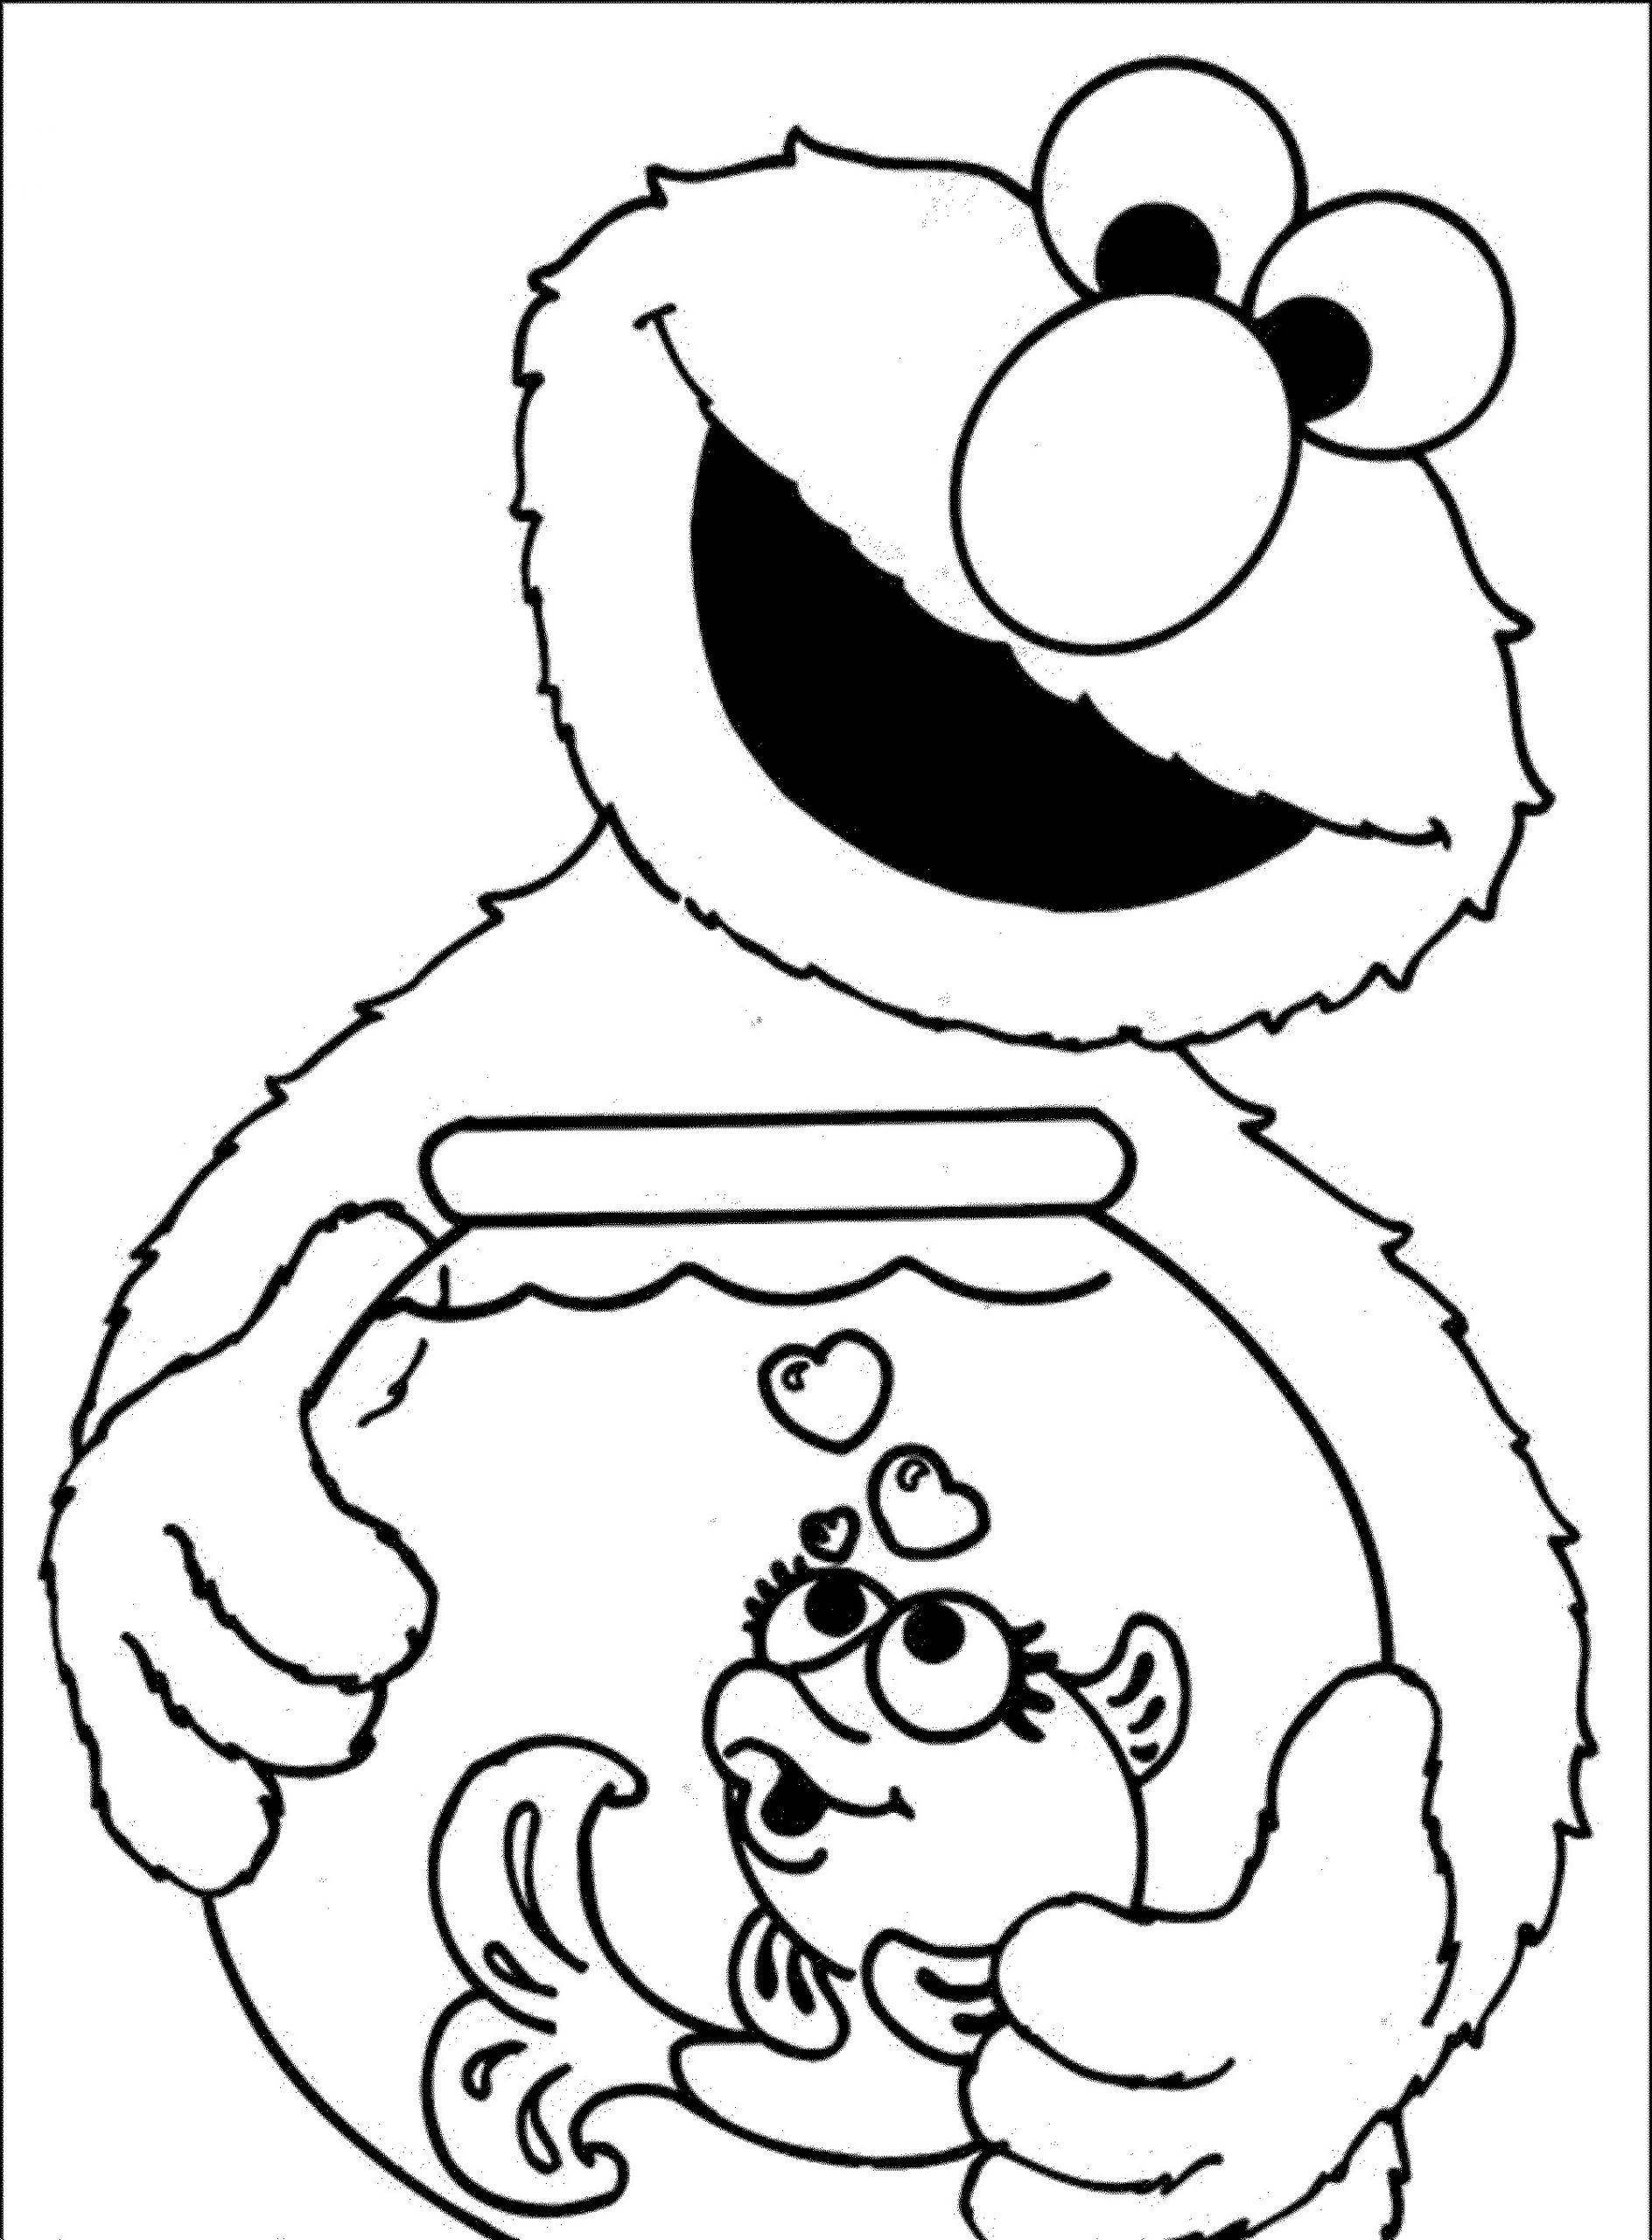 Elmo Coloring Pages For Toddlers
 Print & Download Elmo Coloring Pages for Children’s Home